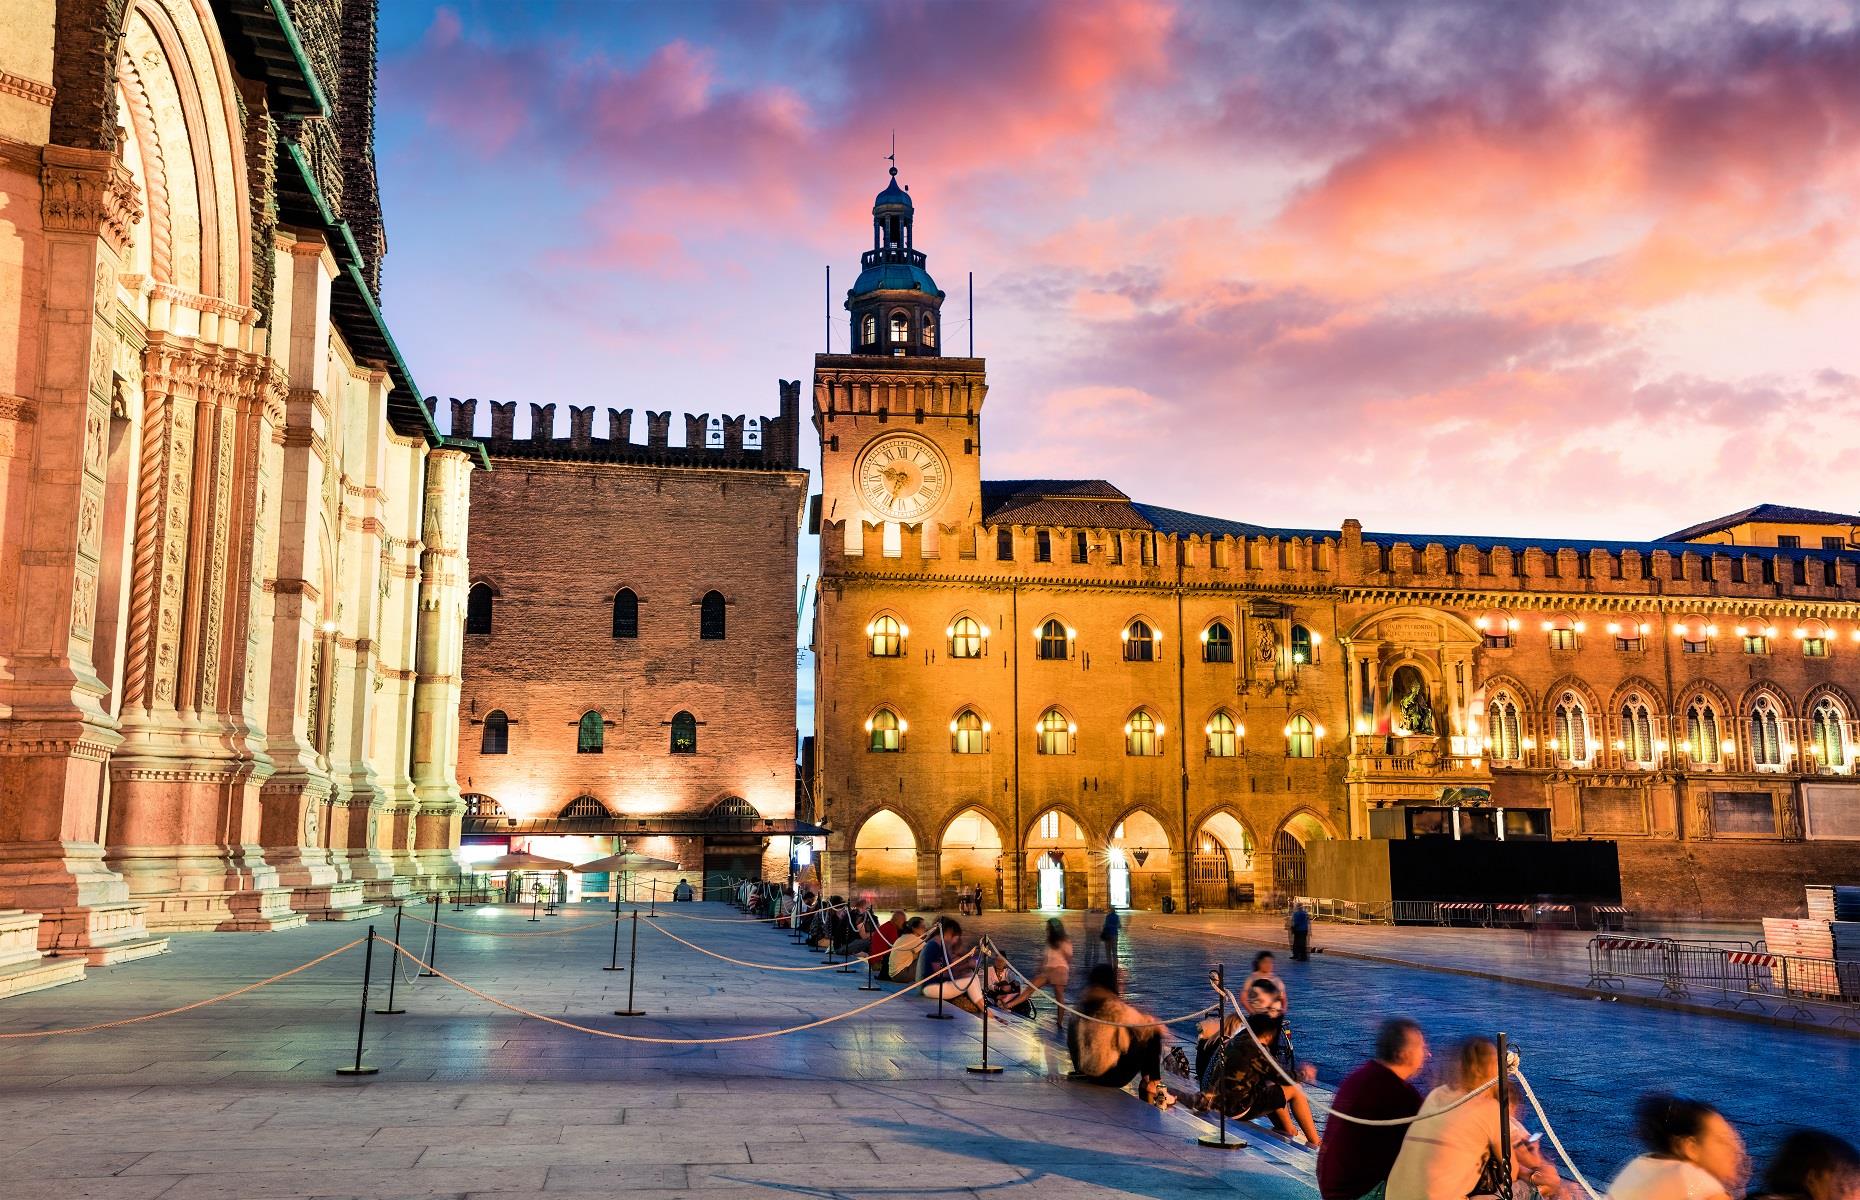 <p>Also known as Alma Mater Studiorum, <a href="https://www.unibo.it/en/university/who-we-are/virtual-tour-of-several-sites-of-the-university-of-bologna">The University of Bologna</a> is considered to be the oldest university in the Western world. Established in 1088, it has five campuses across Italy, in Bologna, Cesena, Forlì, Ravenna and Rimini, and has a community of more than 85,000 students. The institution is housed inside some spectacular buildings dating back to the Middle Ages and the Renaissance era, and highlights include the Bologna University Library, with its arched ceiling, dark wood and ornate columns. You can join private tours of the university, or <a href="https://www.unibo.it/en/university/who-we-are/virtual-tour-of-several-sites-of-the-university-of-bologna">take a virtual tour</a> instead.</p>  <p><a href="https://www.loveexploring.com/gallerylist/108696/italys-most-beautiful-towns-and-villages"><strong>Italy's most beautiful towns and villages</strong></a></p>